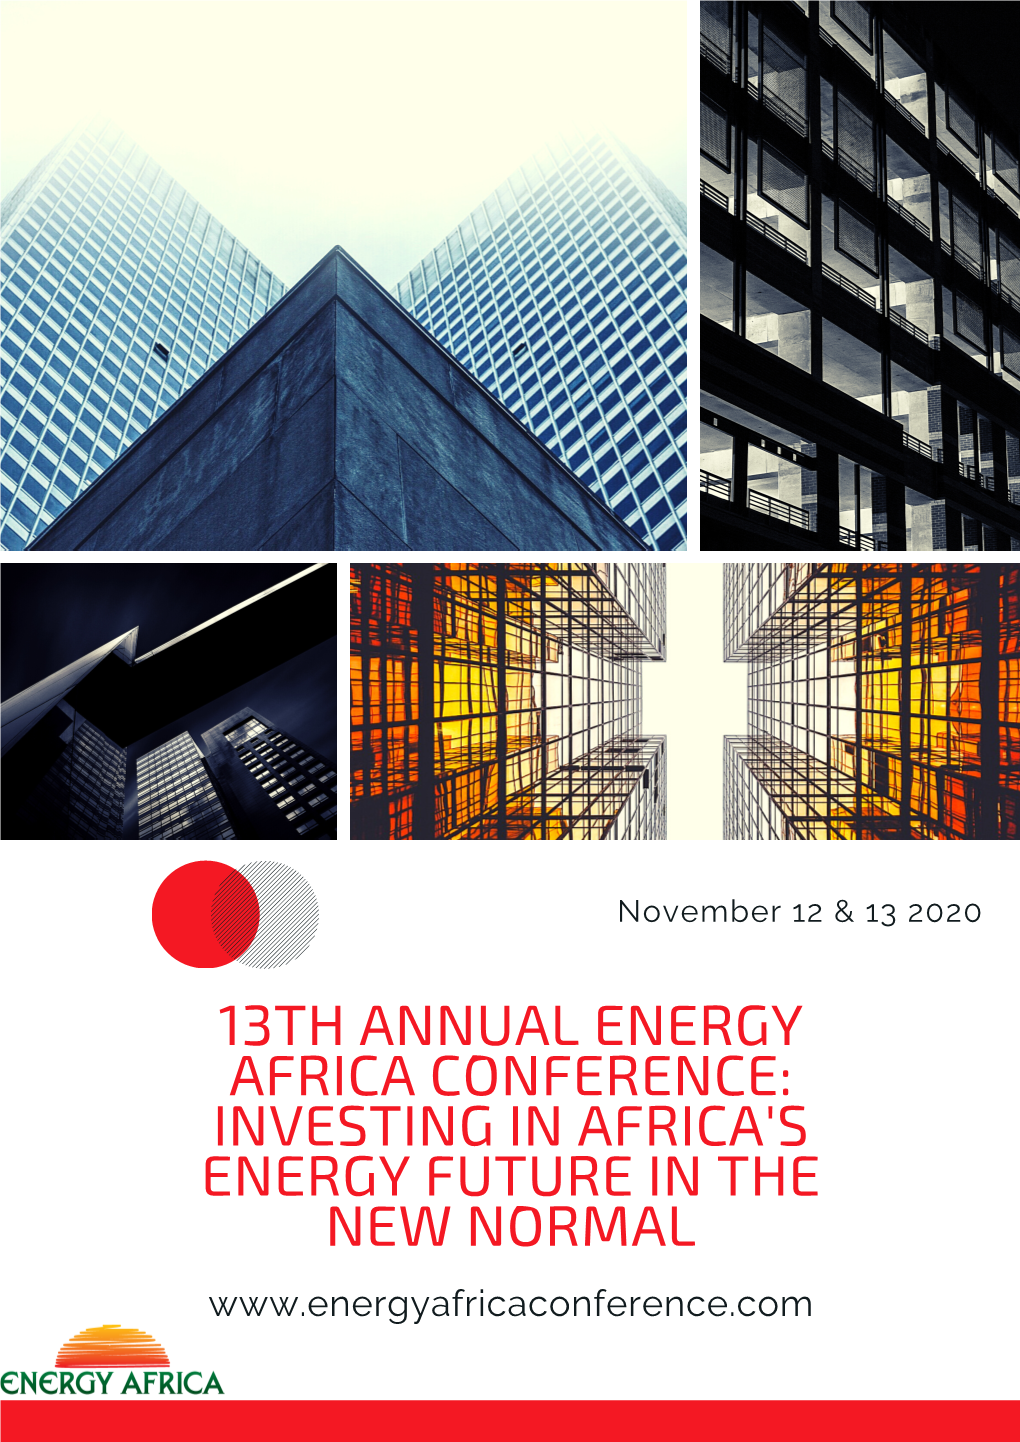 13TH ANNUAL ENERGY AFRICA CONFERENCE: INVESTING in AFRICA's ENERGY FUTURE in the NEW NORMAL Message from the Executive Director